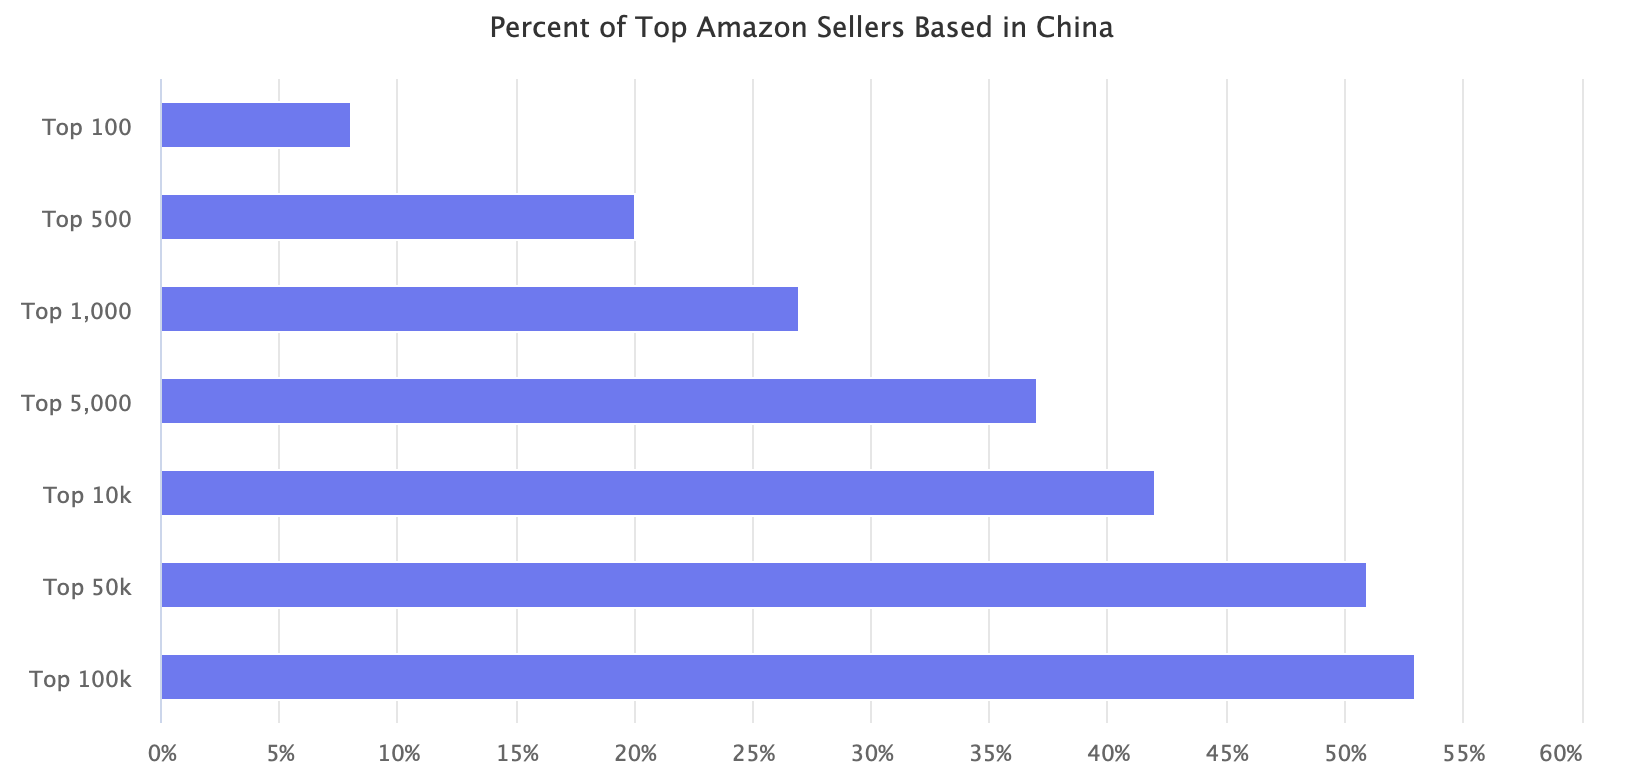 Percentage of top Amazon sellers based in China